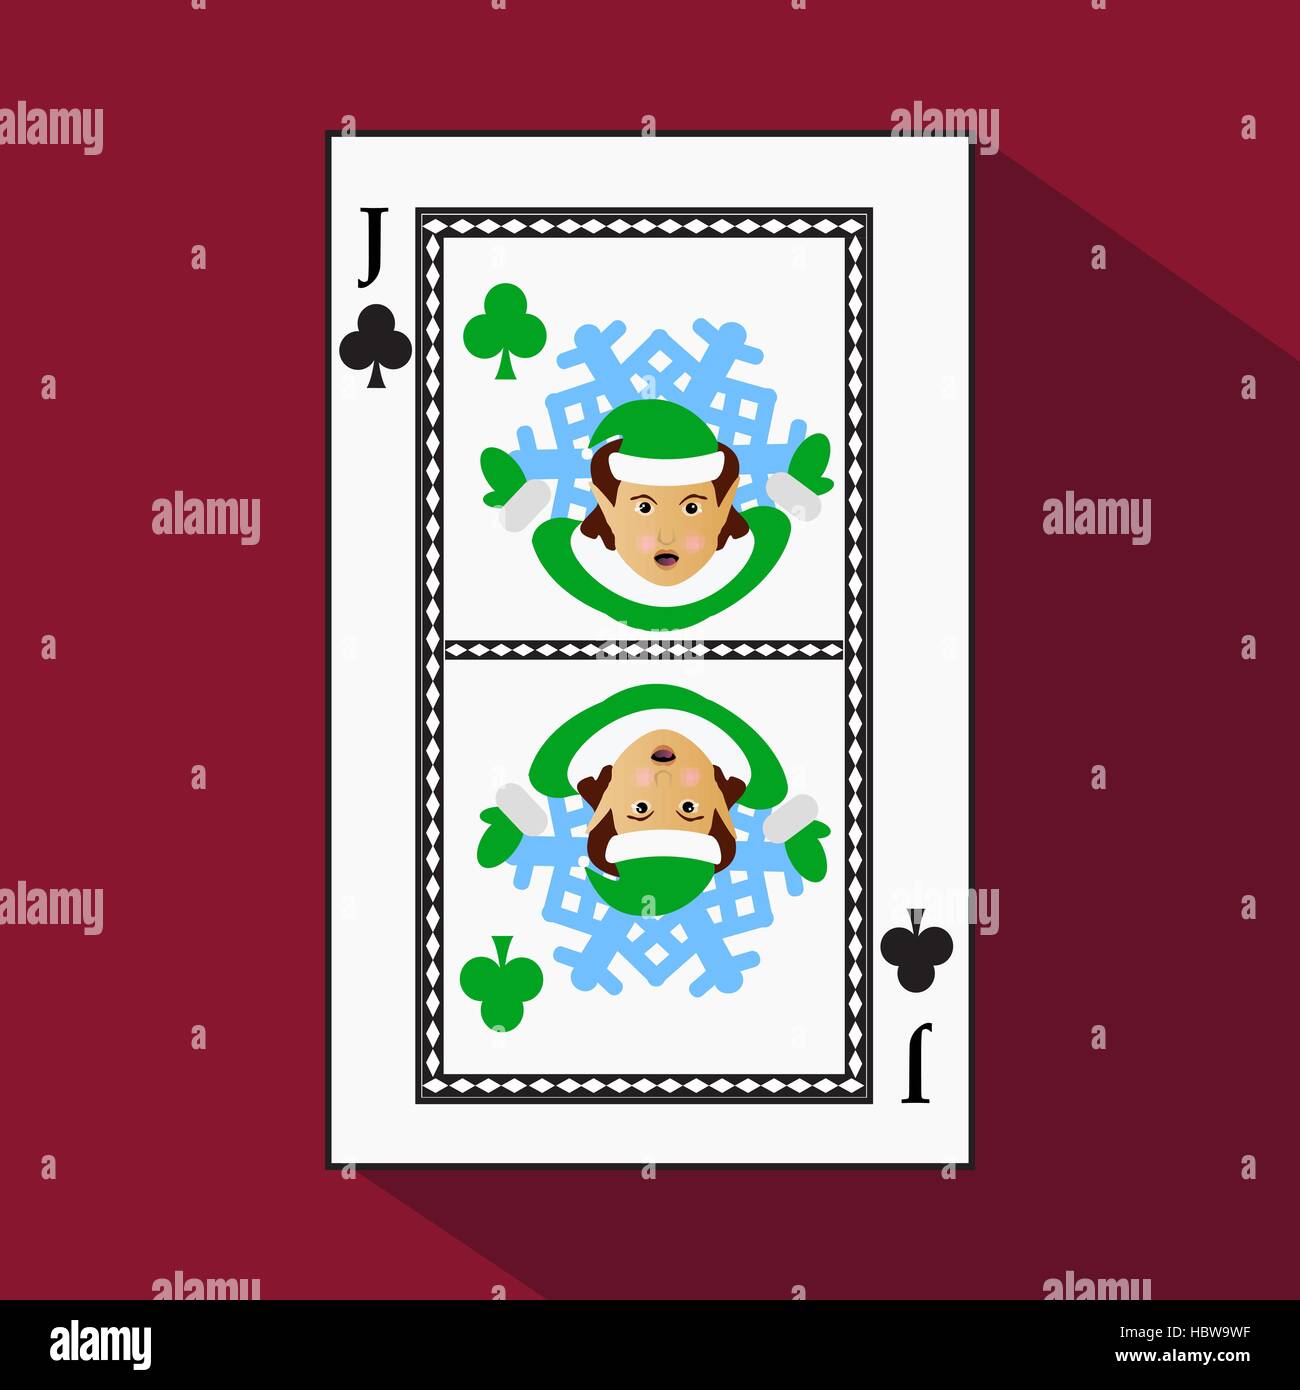 playing card. the icon picture is easy. CLUB playing card. the icon picture is easy. CLUB JACK JOKER NEW YEAR ELF. CHRISTMAS SUBJECT. with white a bas Stock Vector